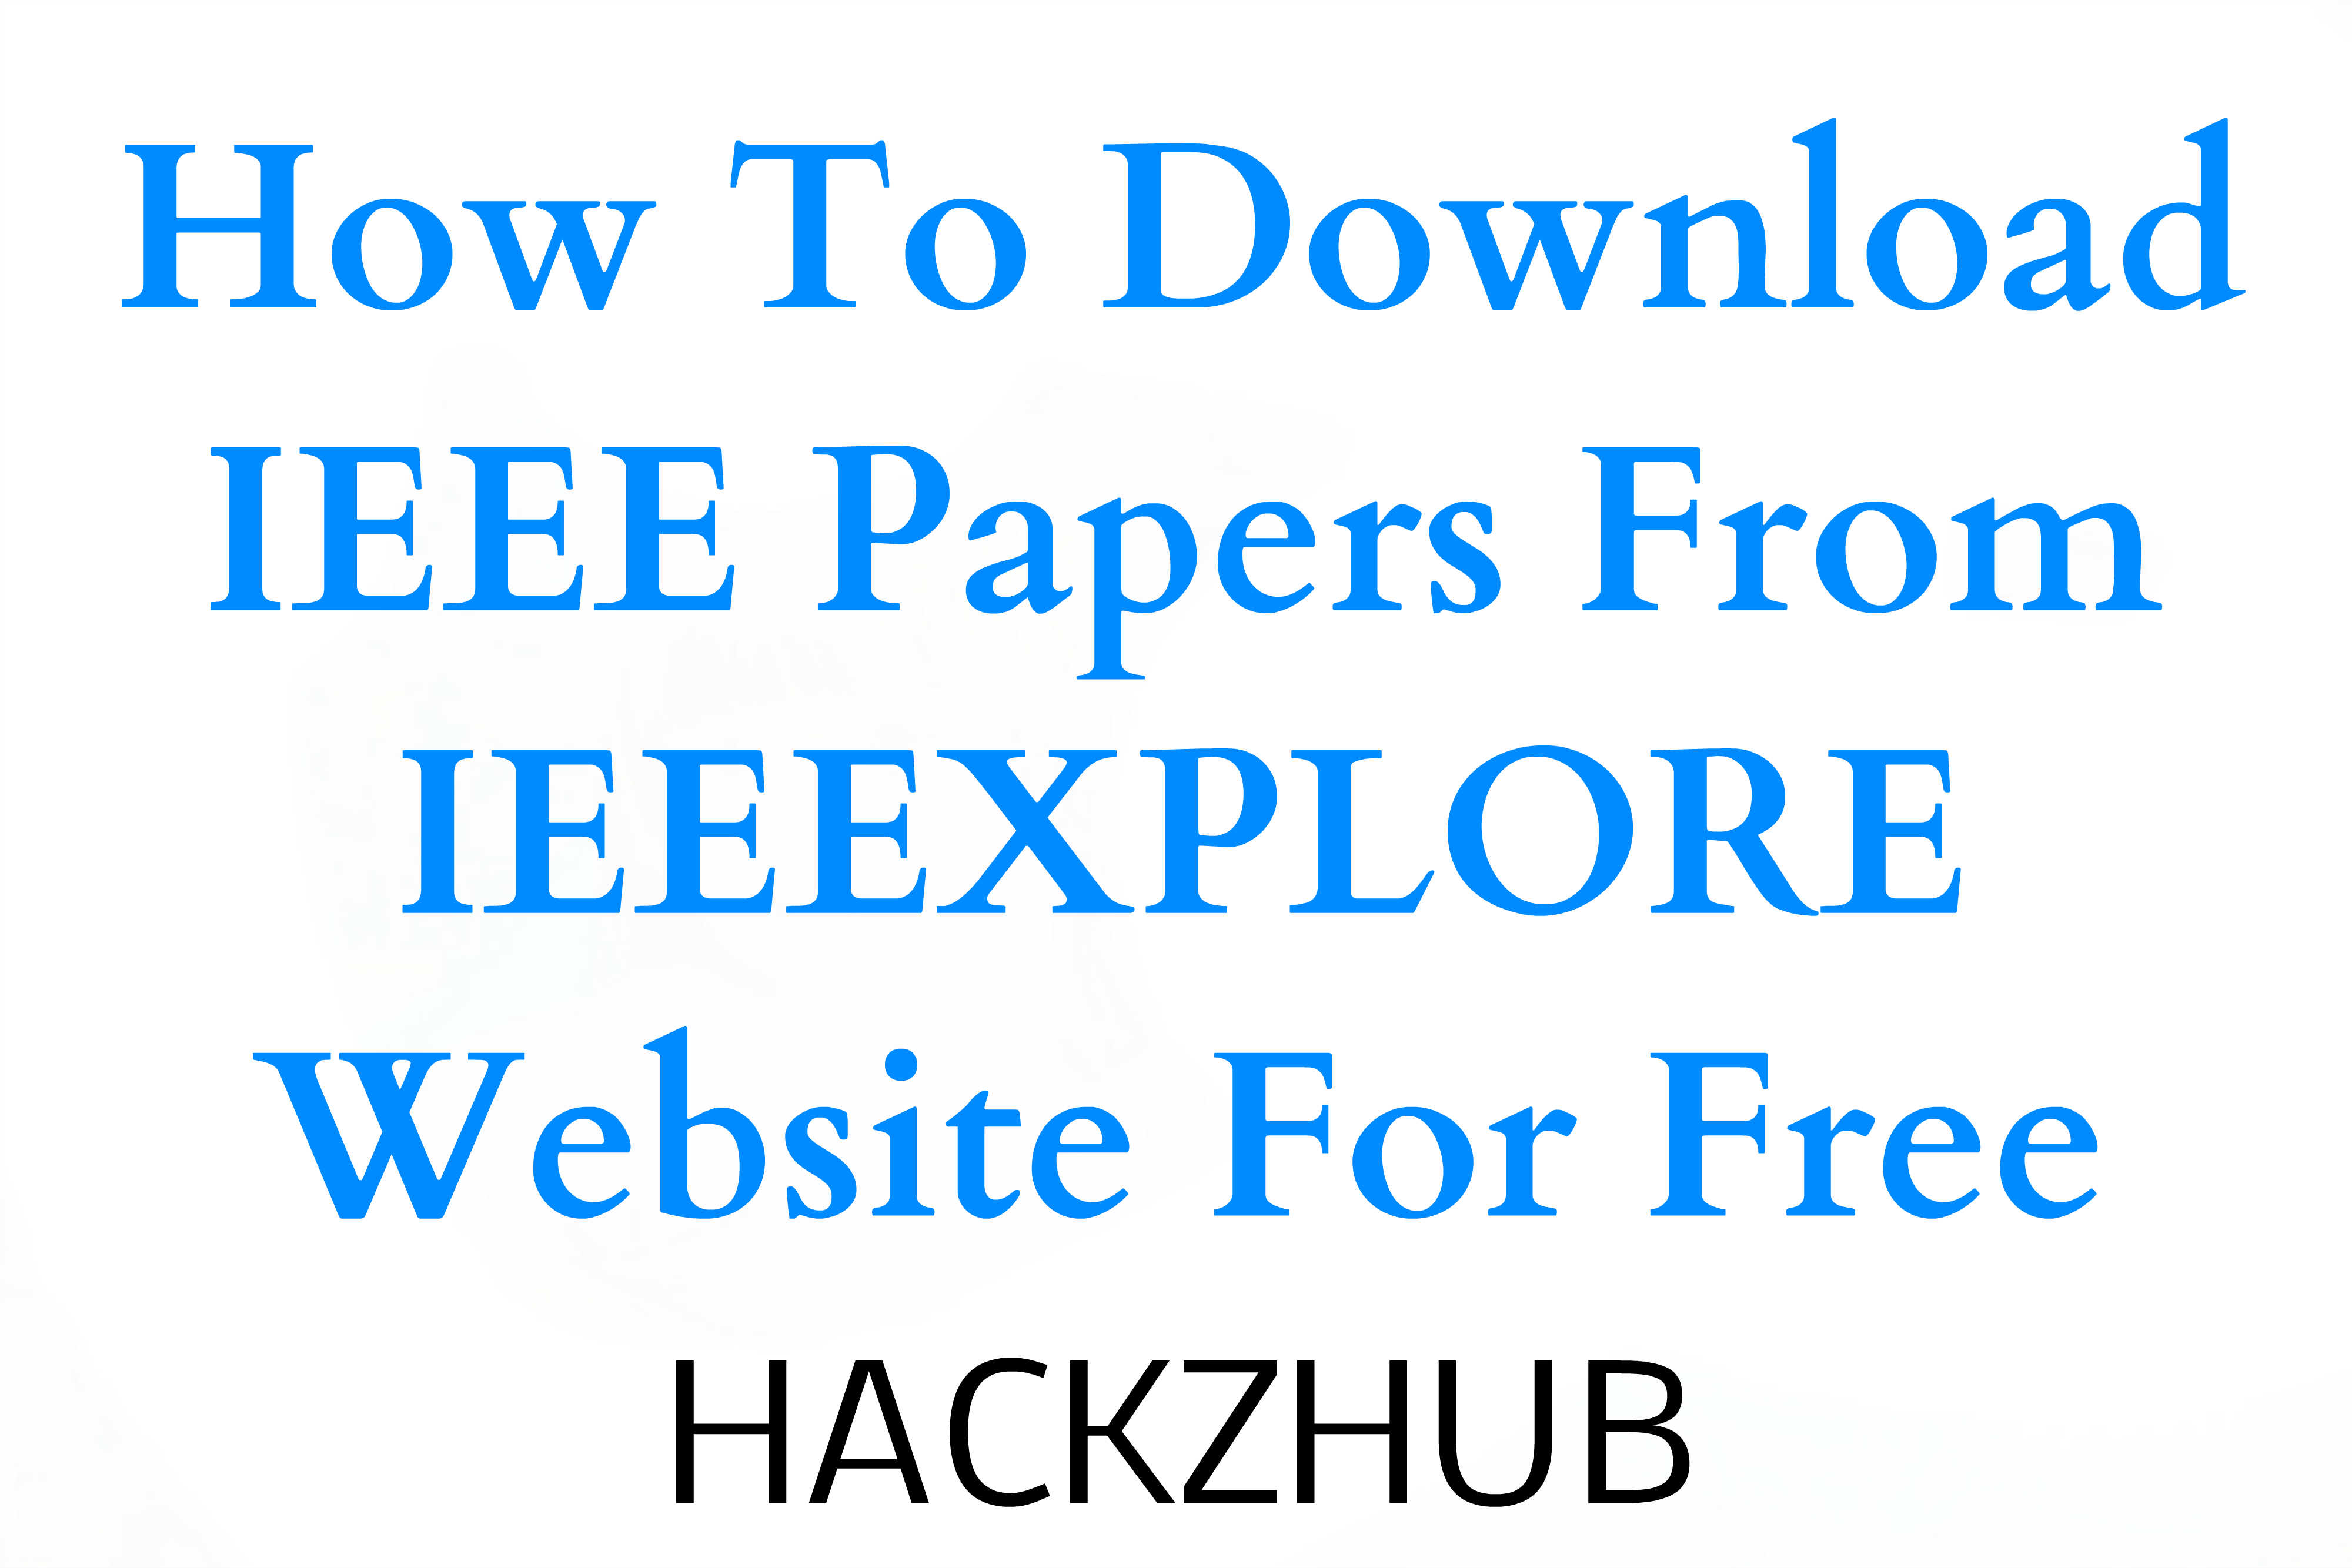 IEEE Research Papers Free Download